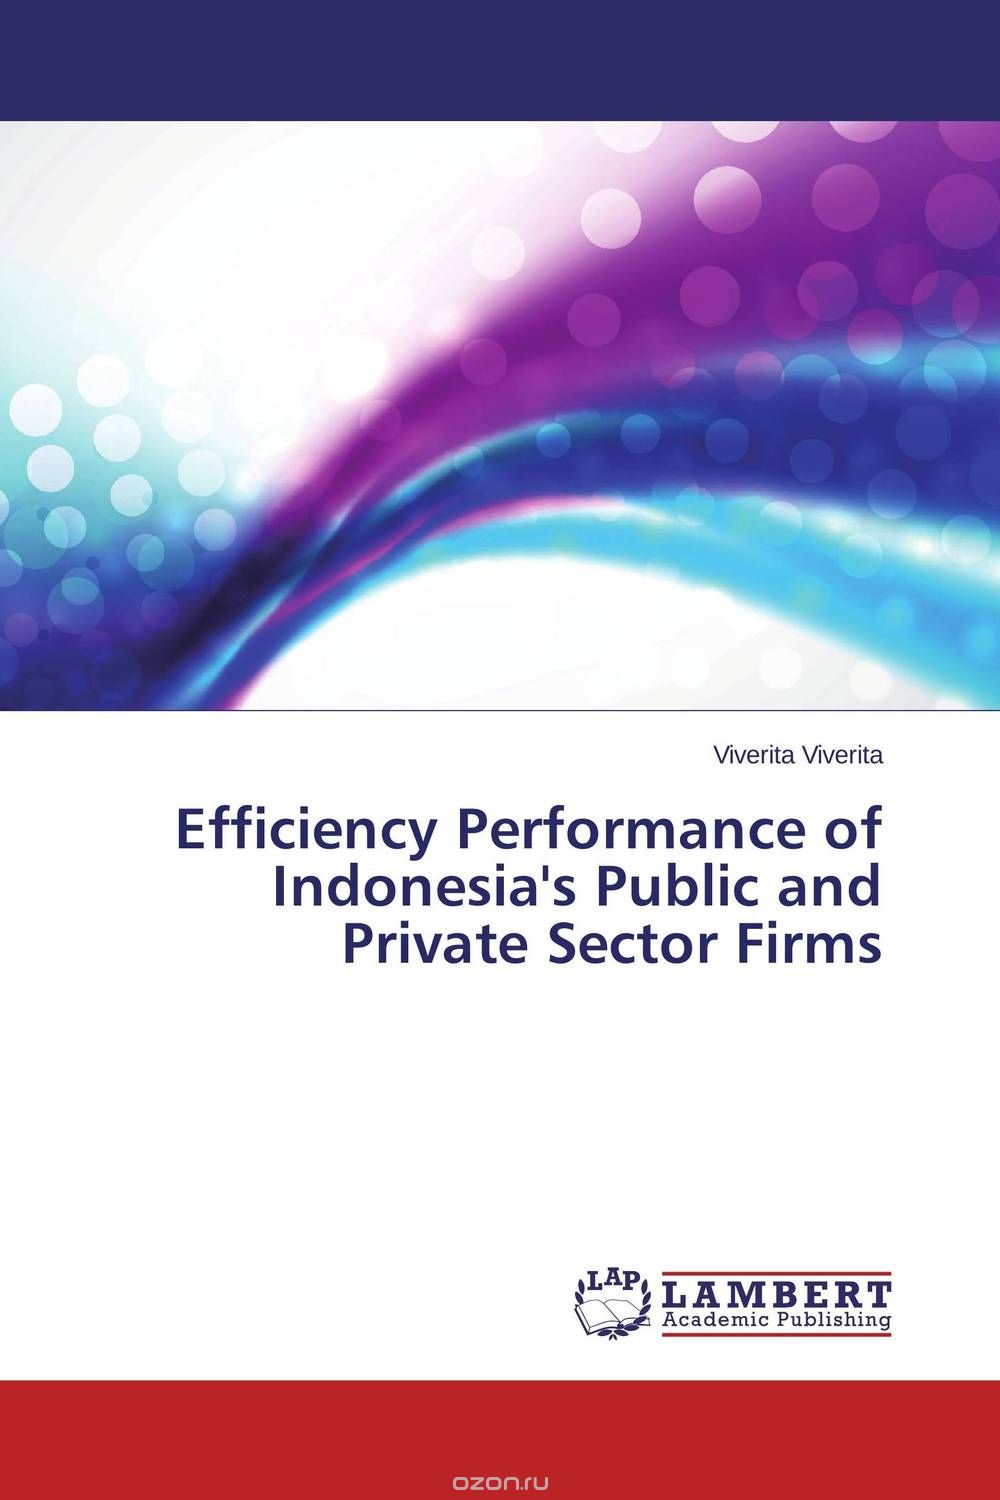 Скачать книгу "Efficiency Performance of Indonesia's Public and Private Sector Firms"